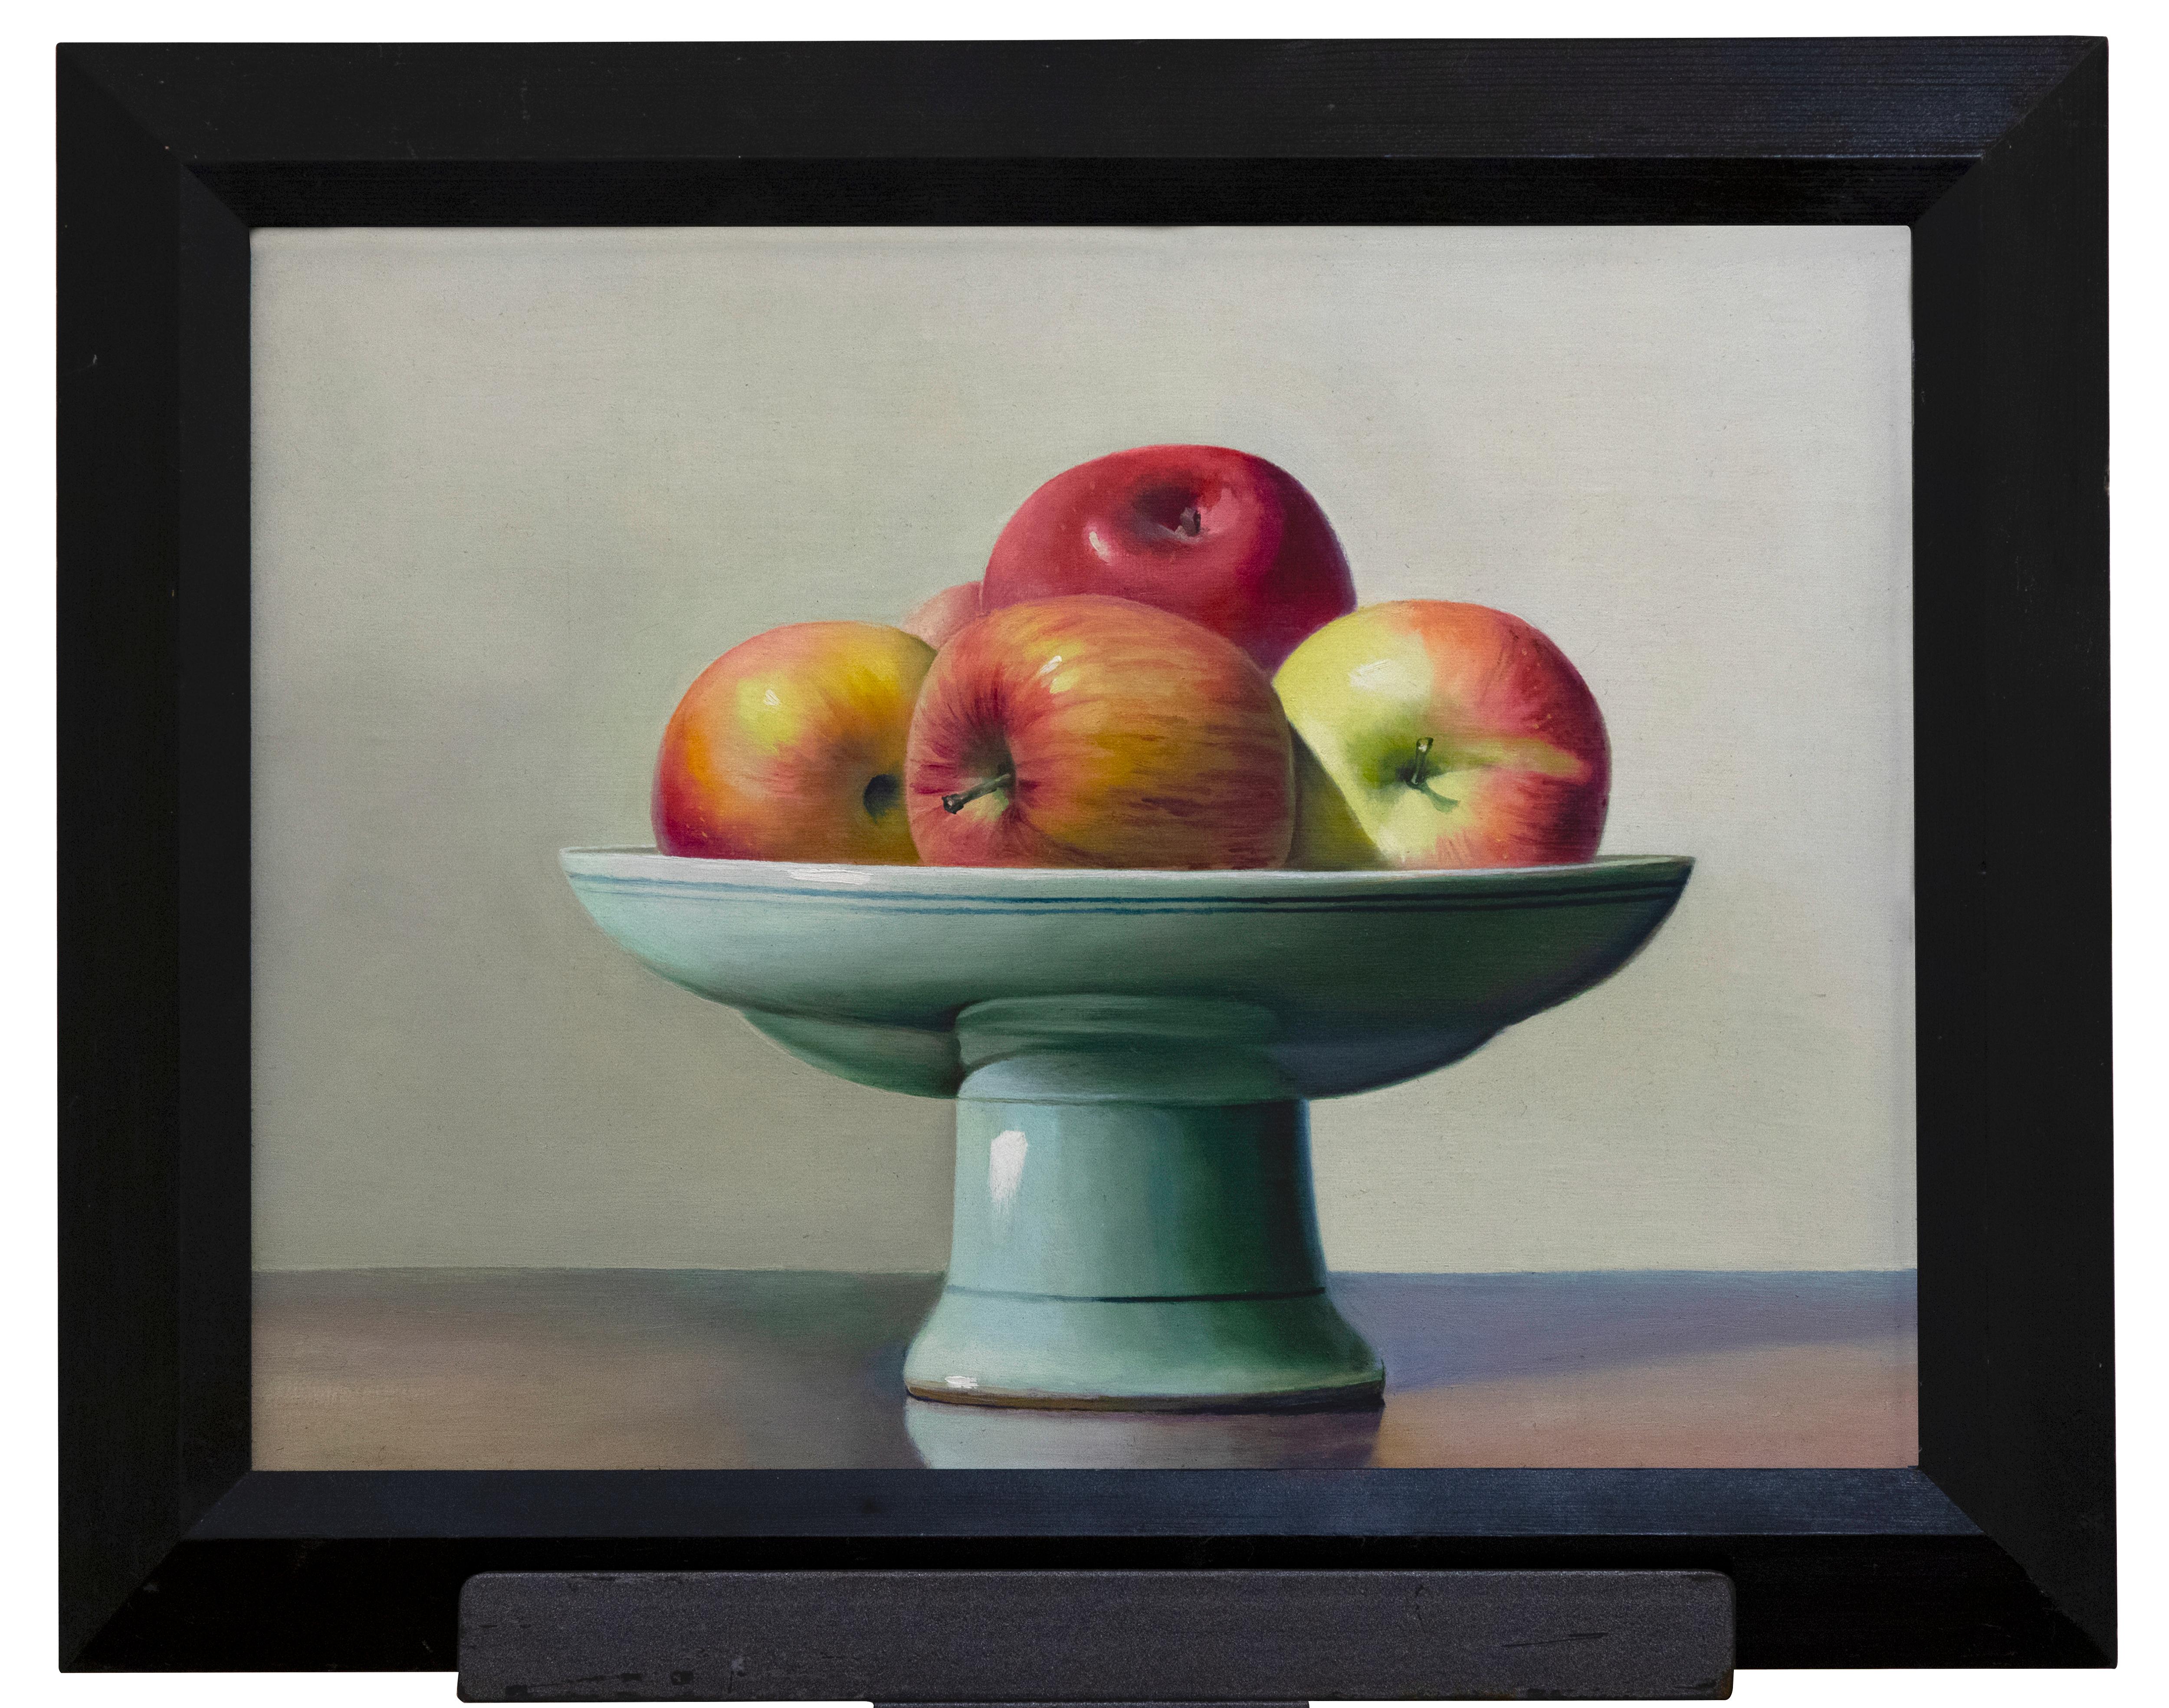 Still Life with Apples - Oil on Canvas by Zhang Wei Guang (Mirror) - 2000